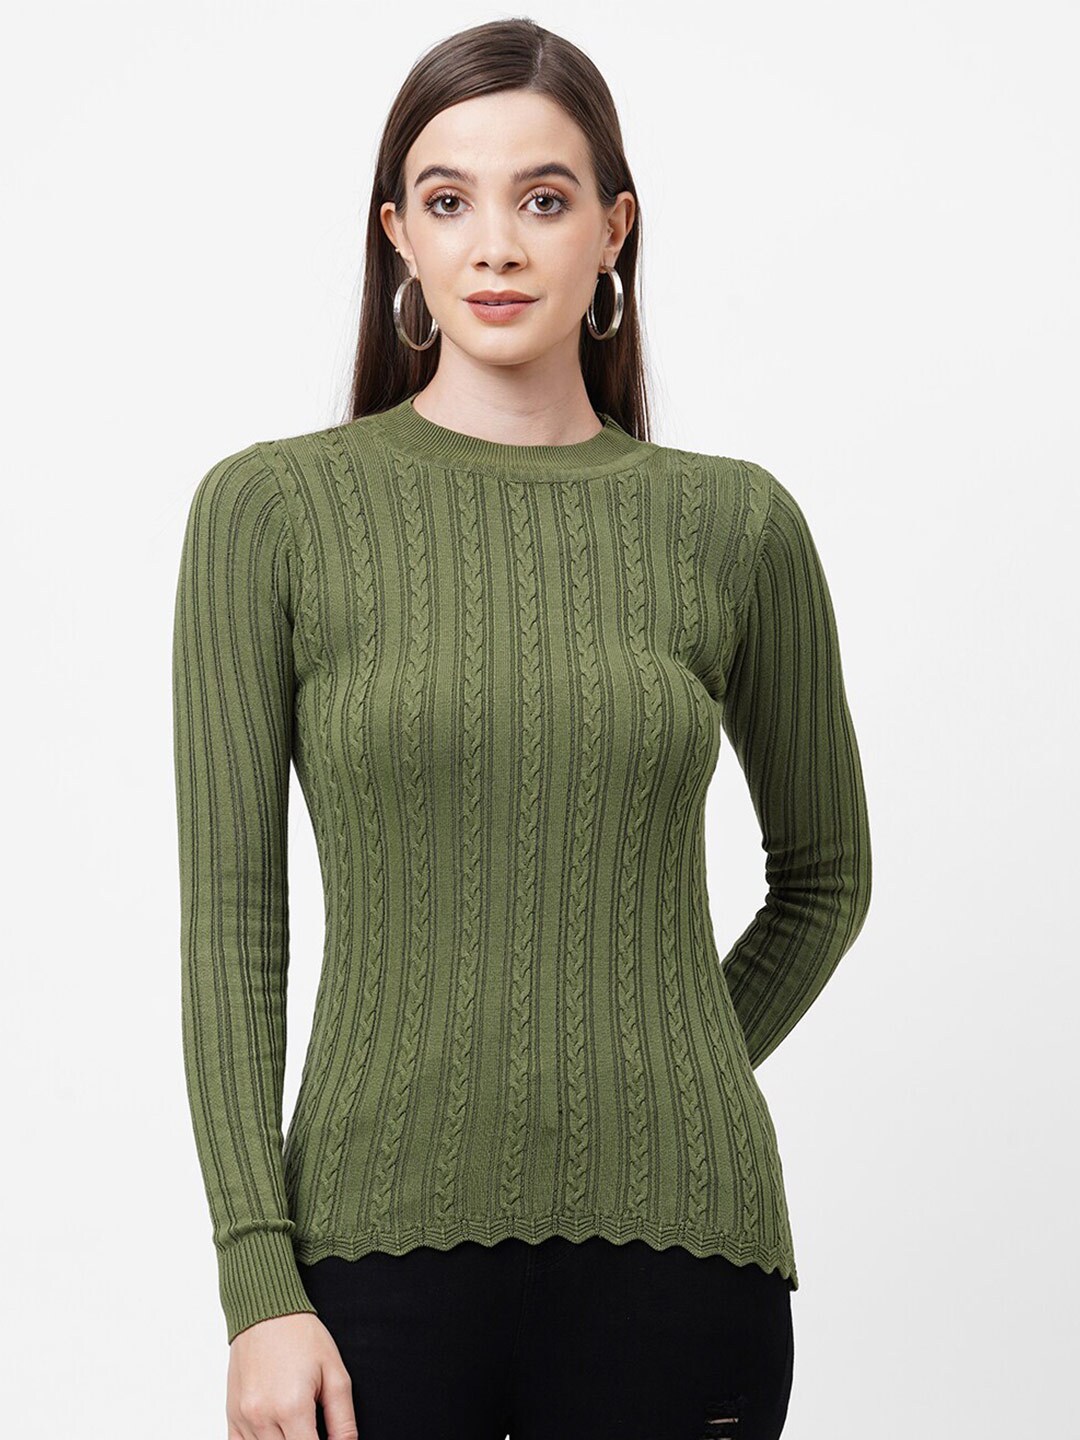 Kraus Jeans Women Olive Green Cable Knit Pullover Price in India